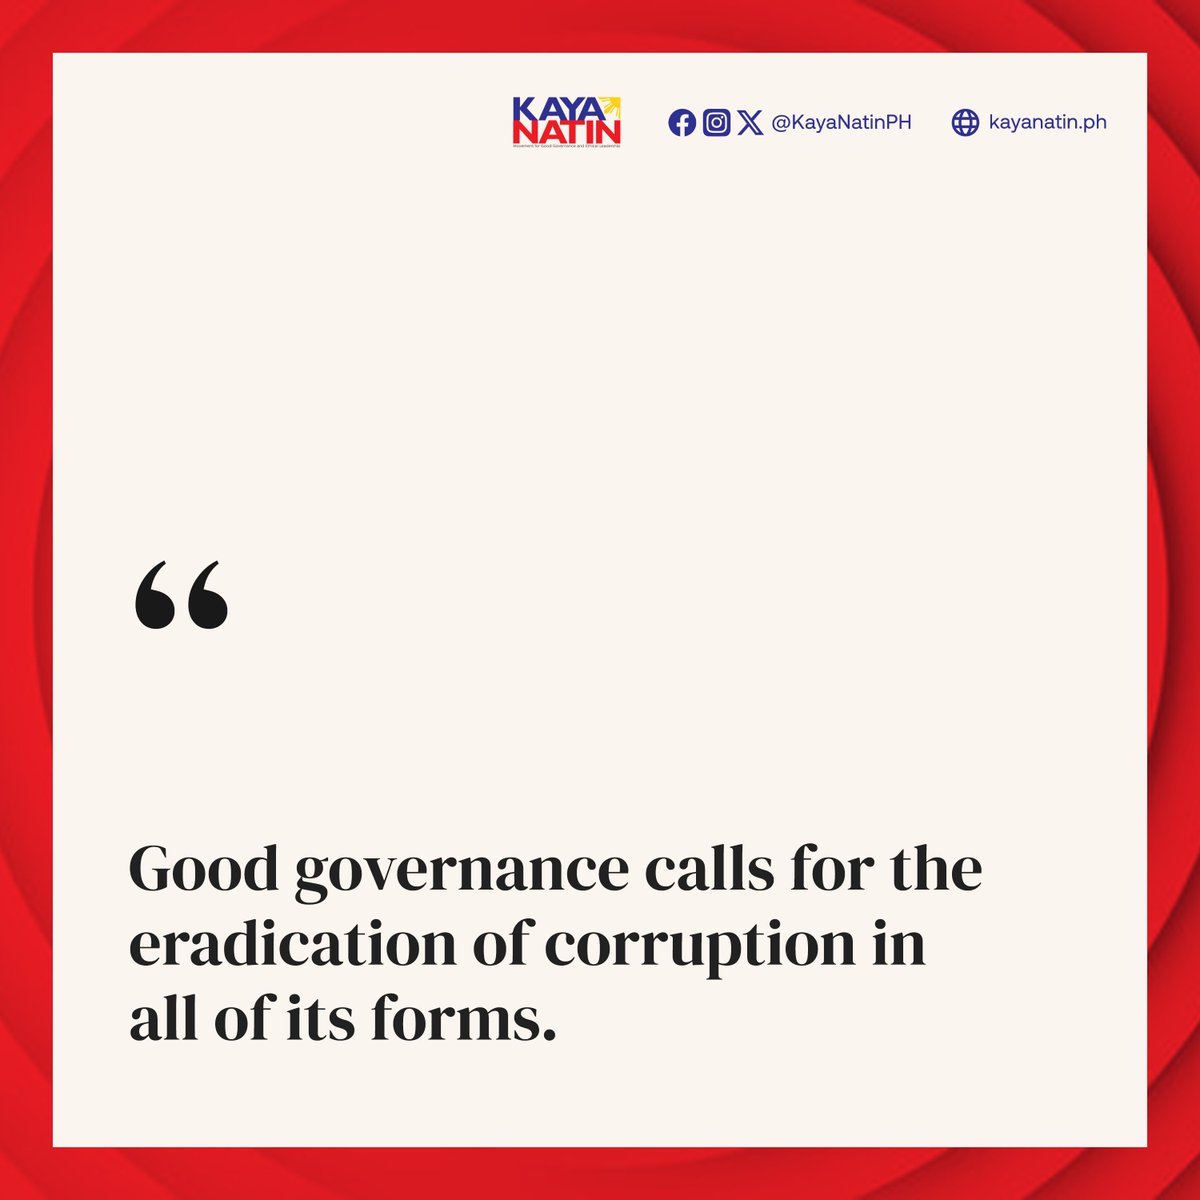 Good governance calls for the eradication of corruption in all of its forms.